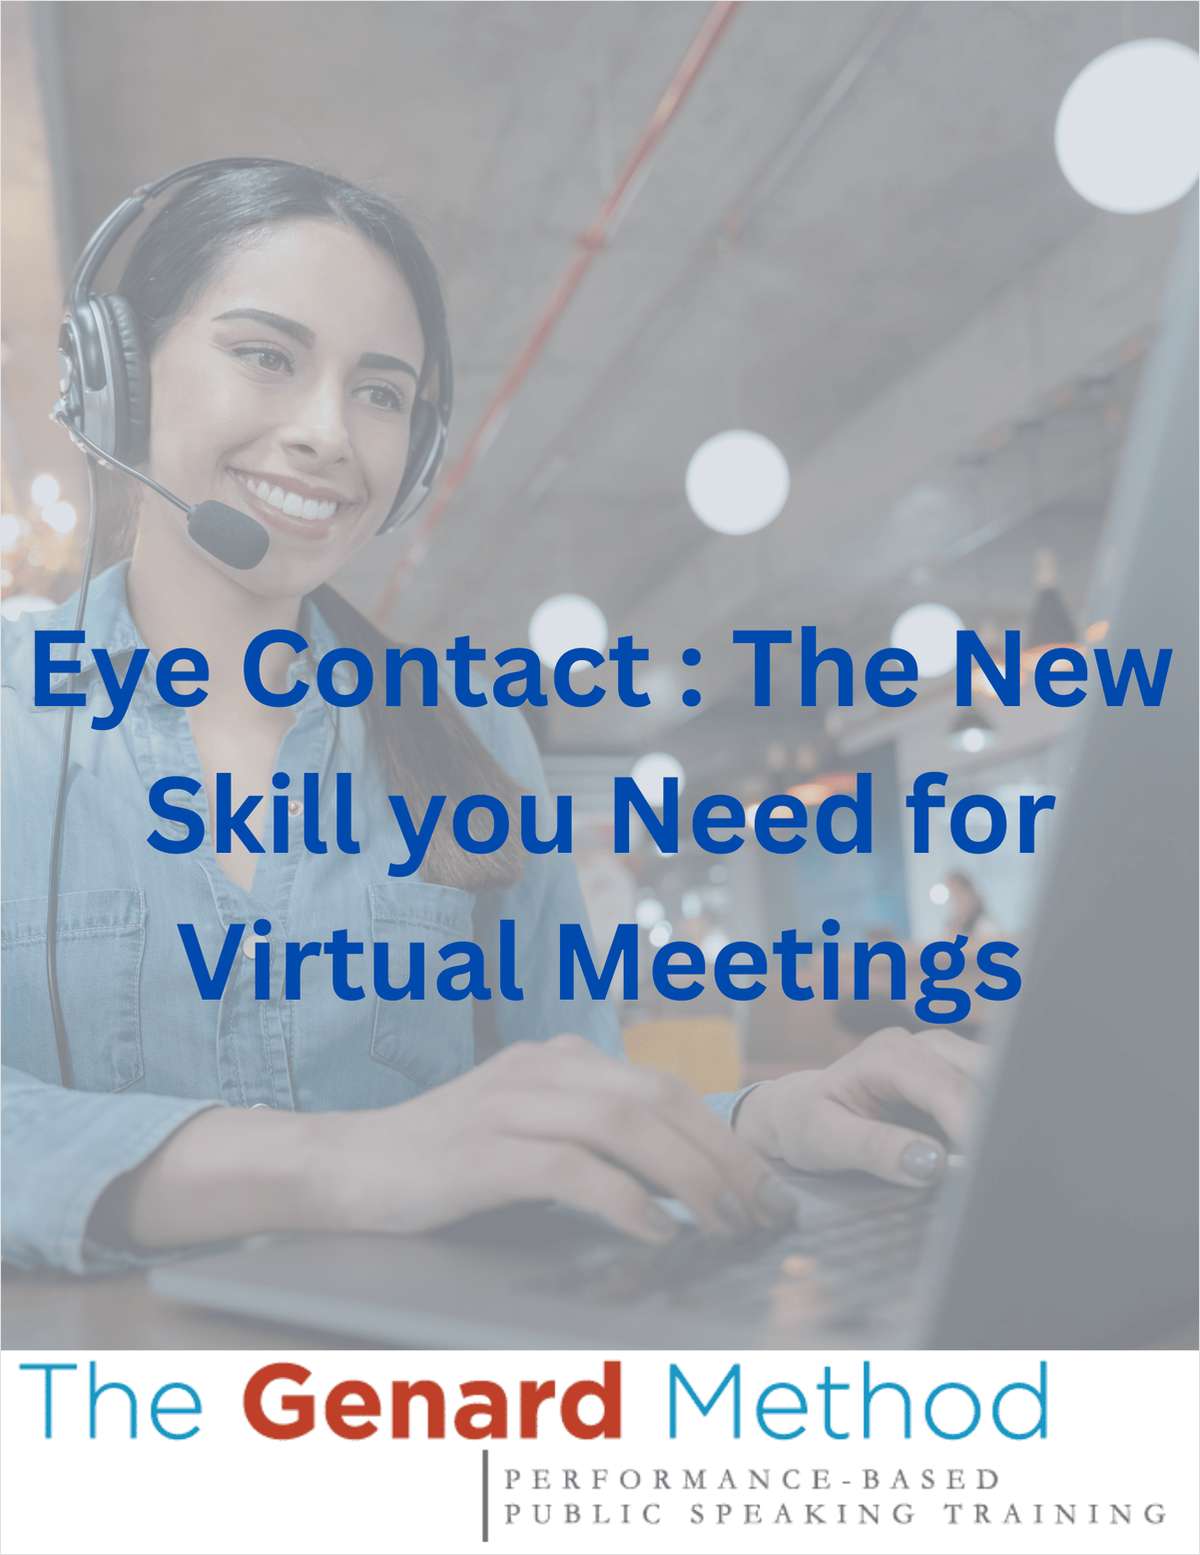 Eye Contact: The New Skill you Need for Virtual Meetings